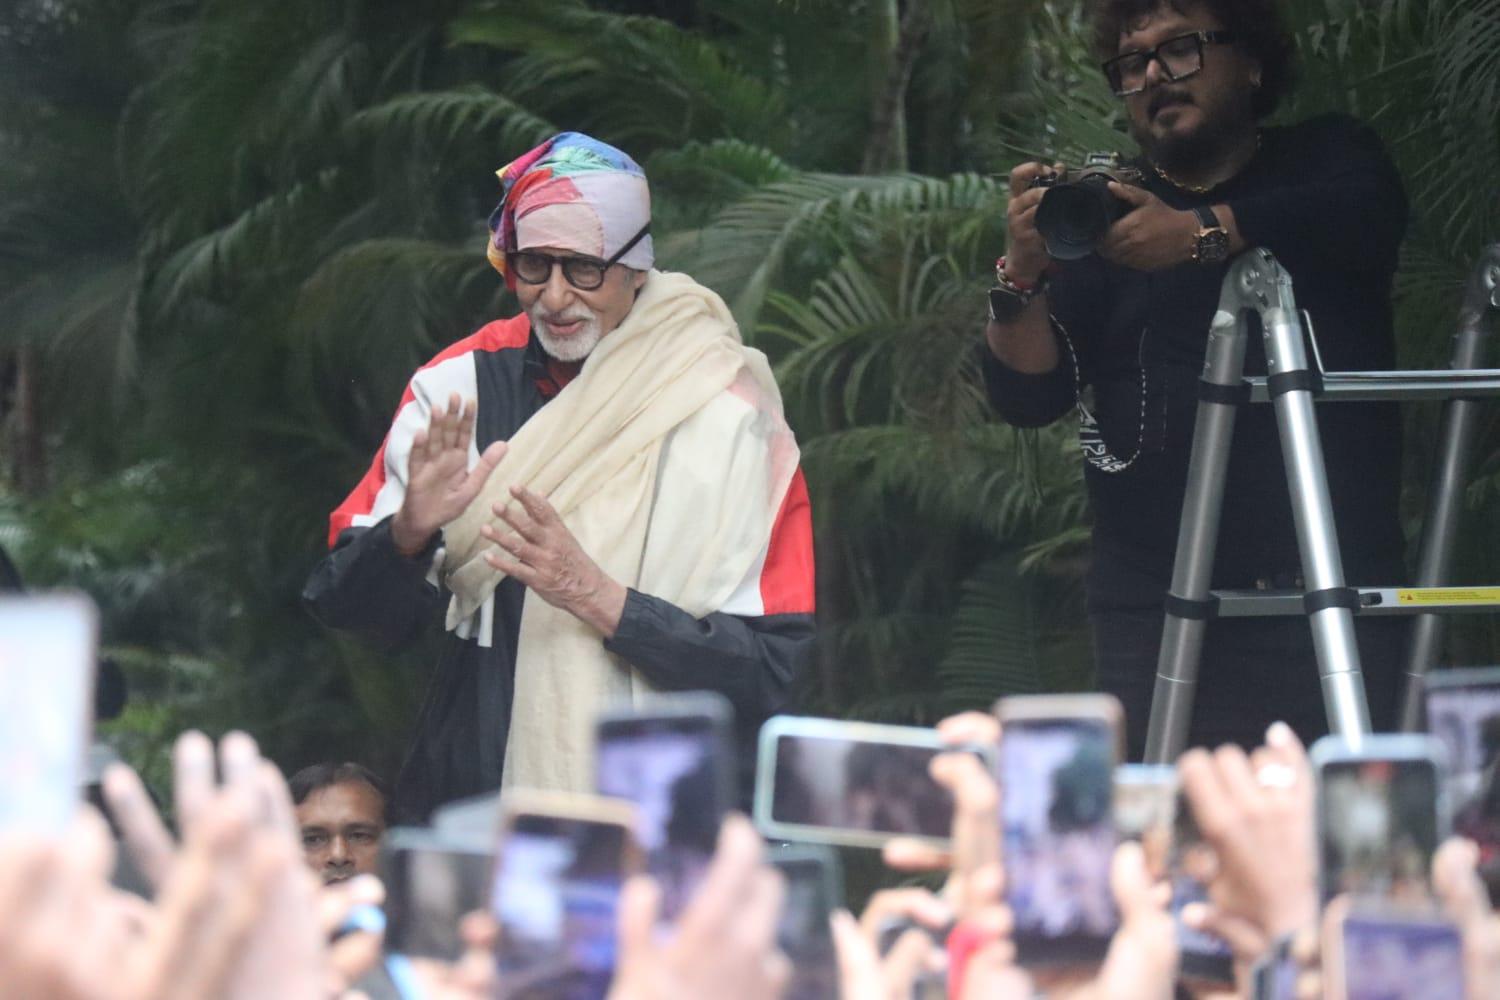 The living legend, Amitabh Bachchan, left his fans elated as he greeted them with warmth outside his residence. 